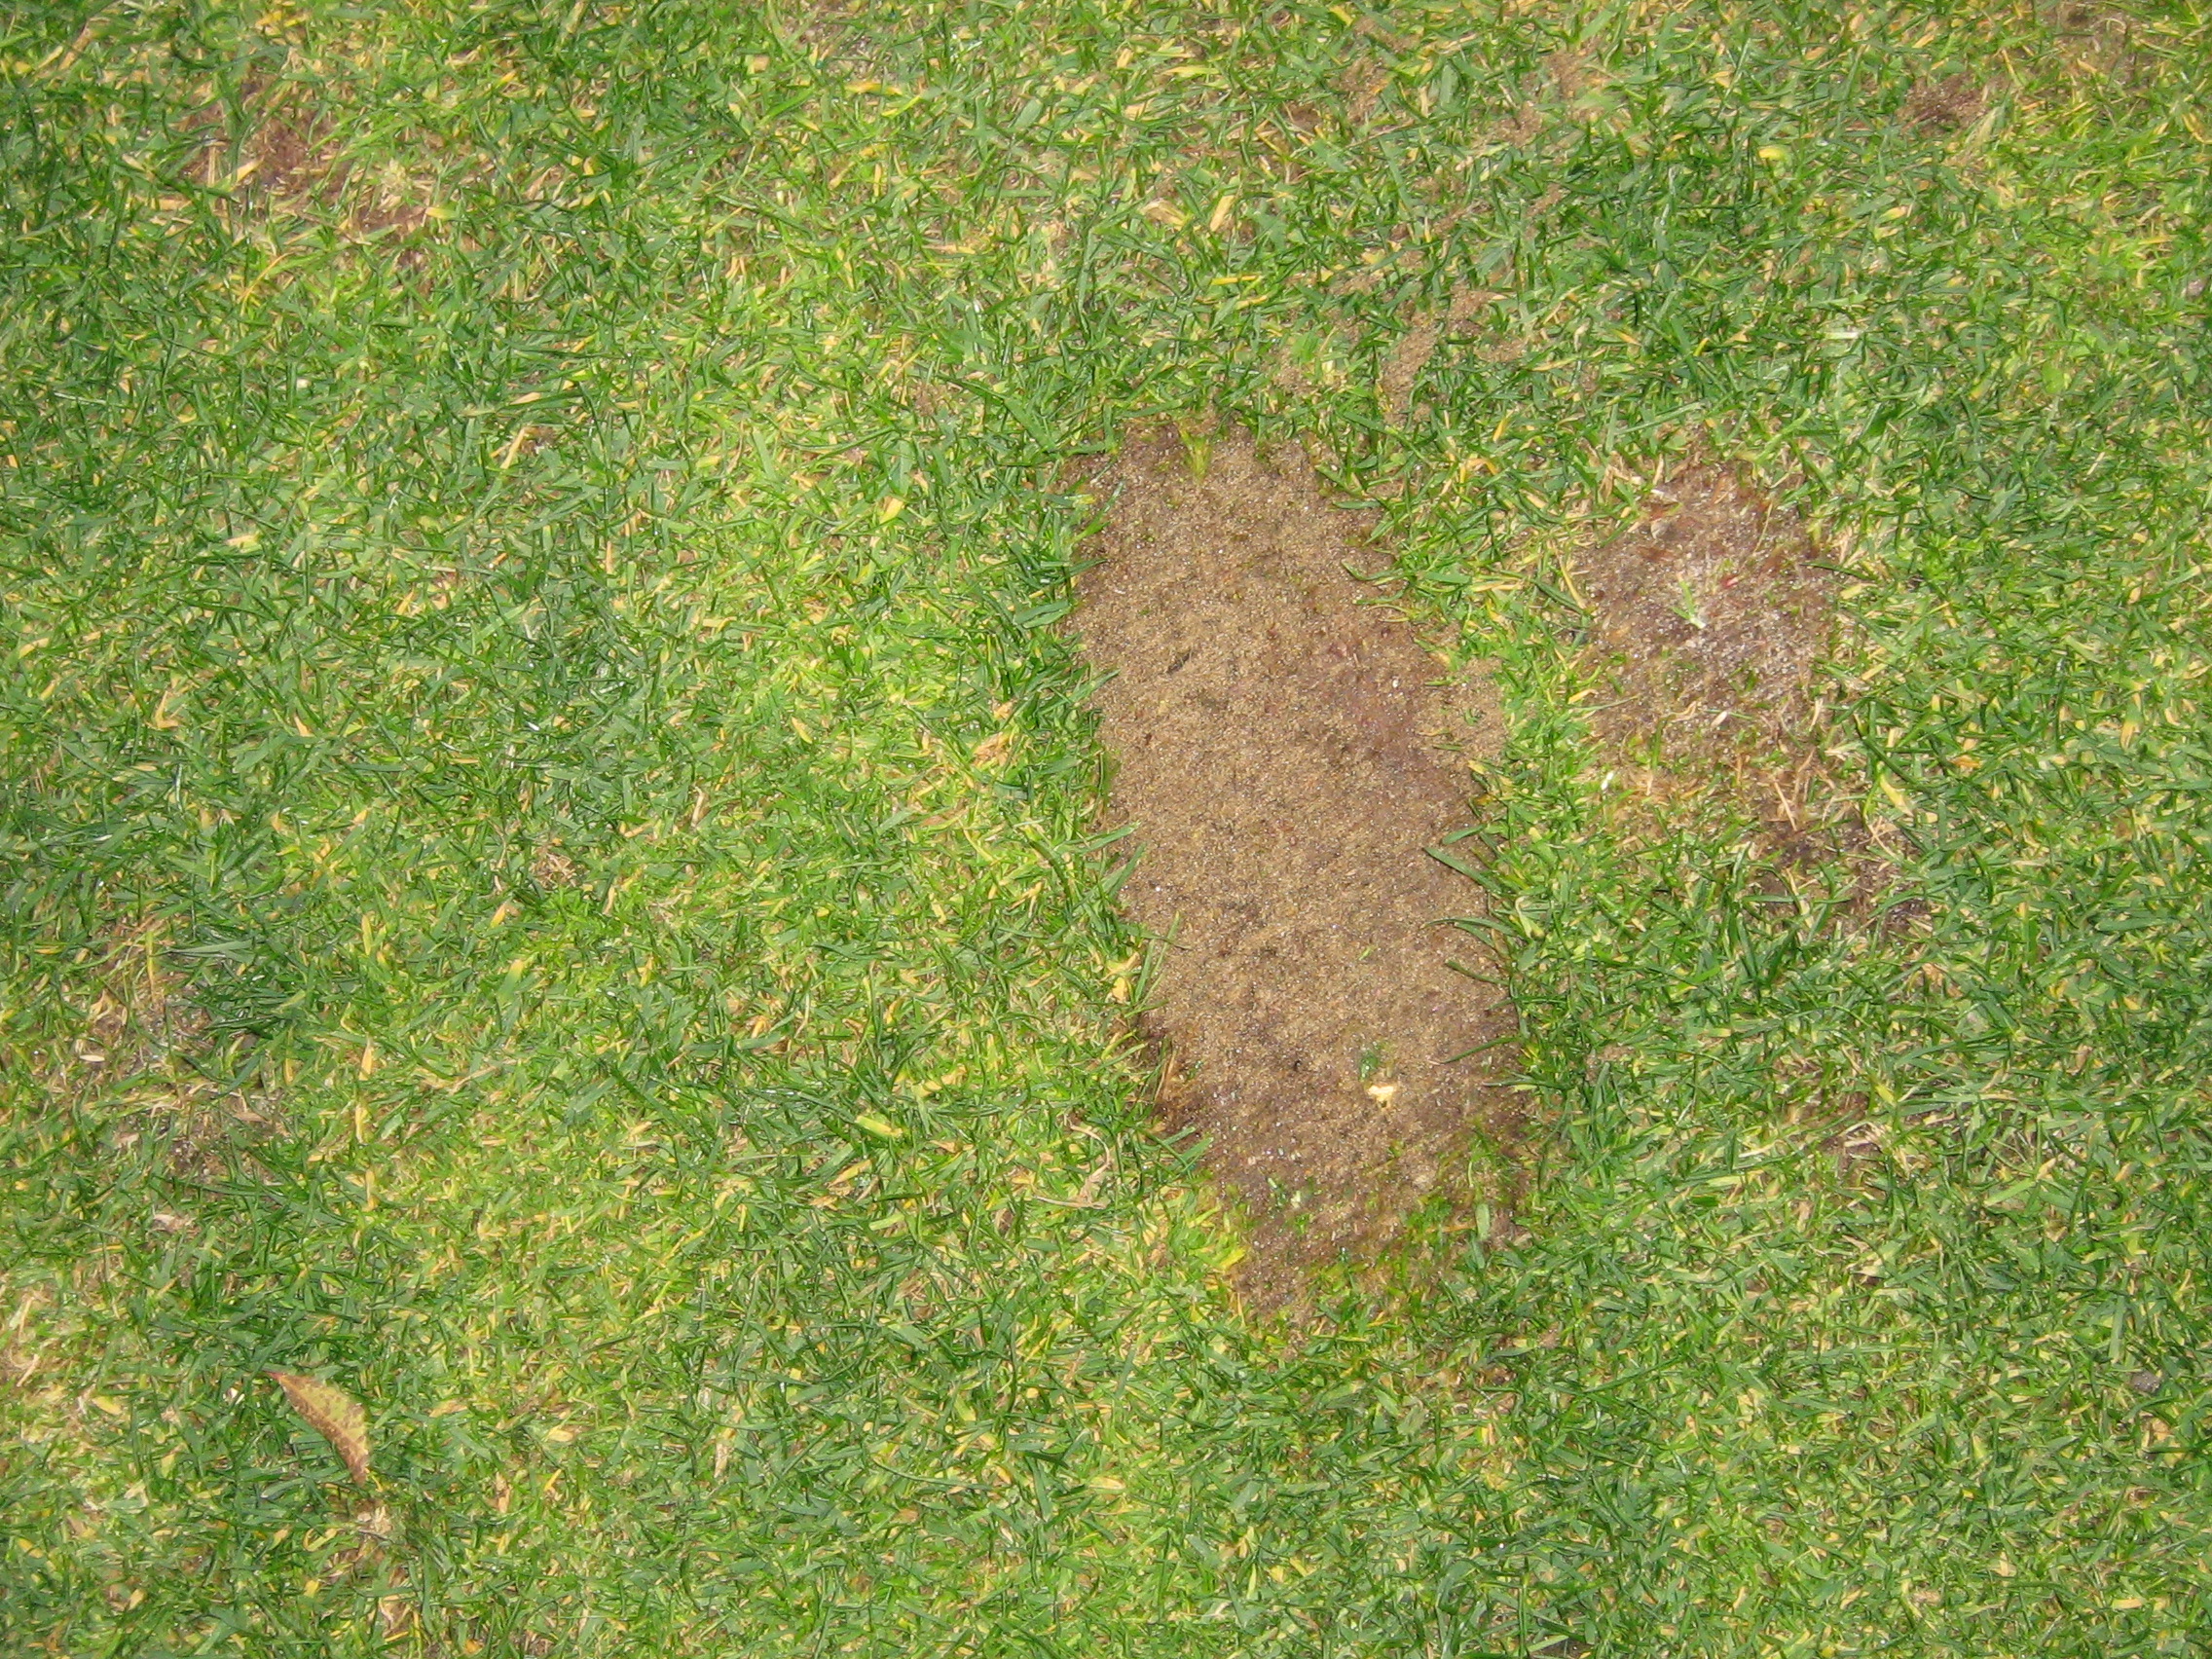 Divot at the Mare.JPG